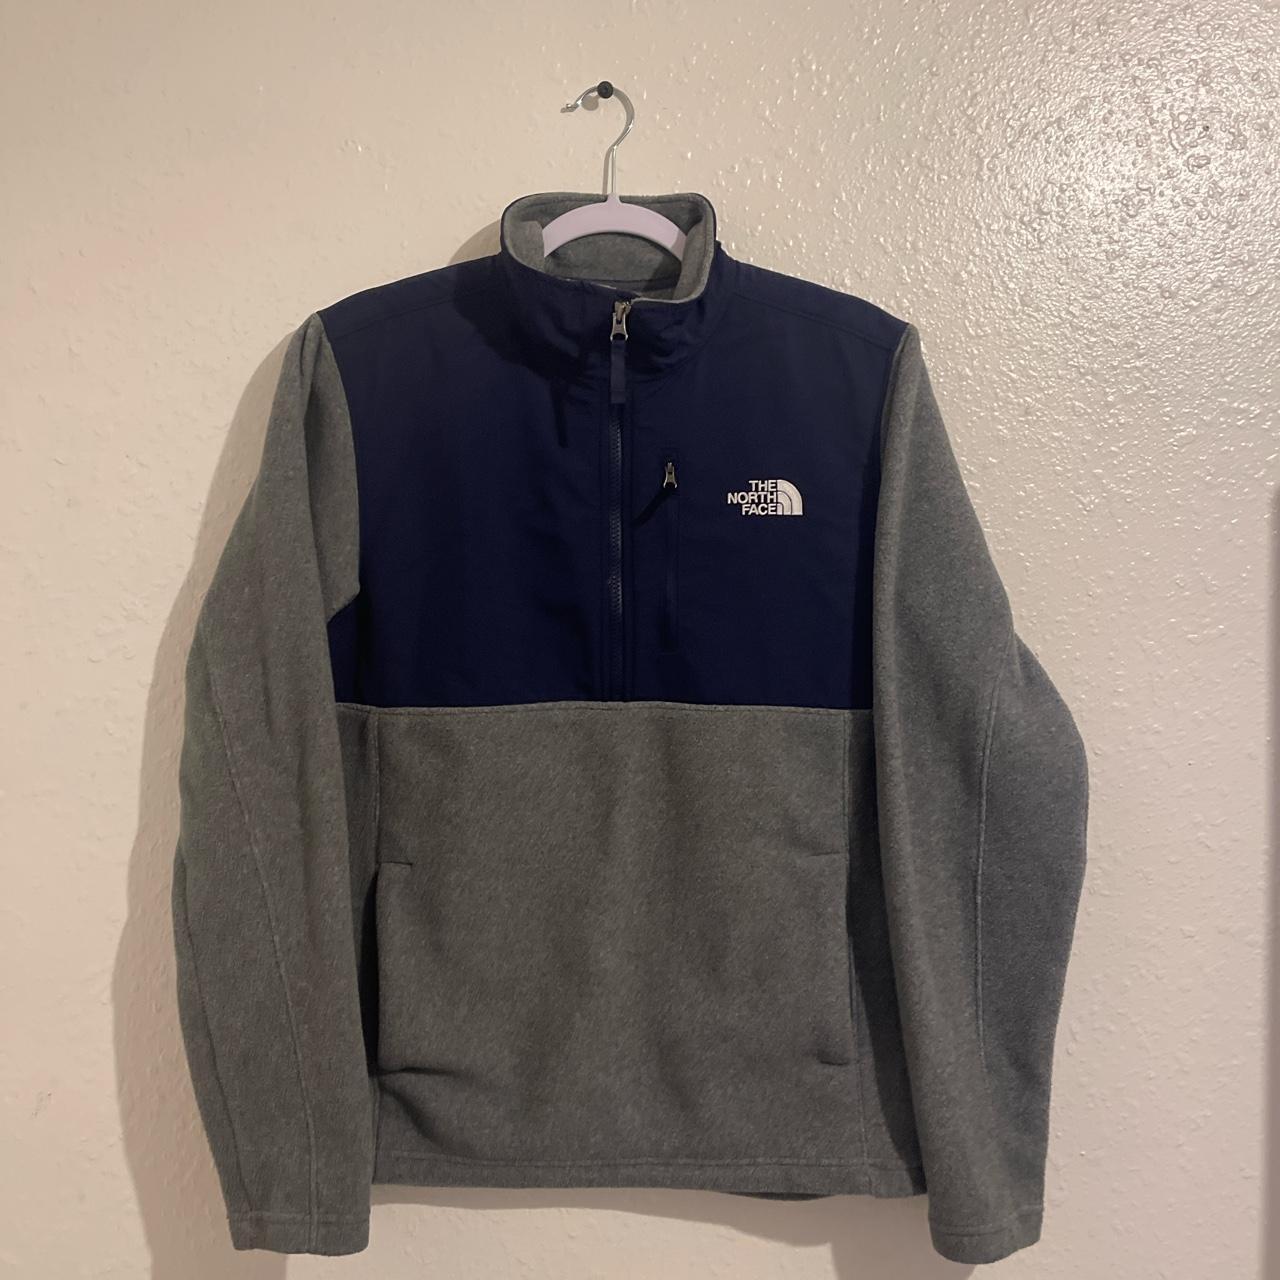 The North Face Men's Navy and Grey Jacket